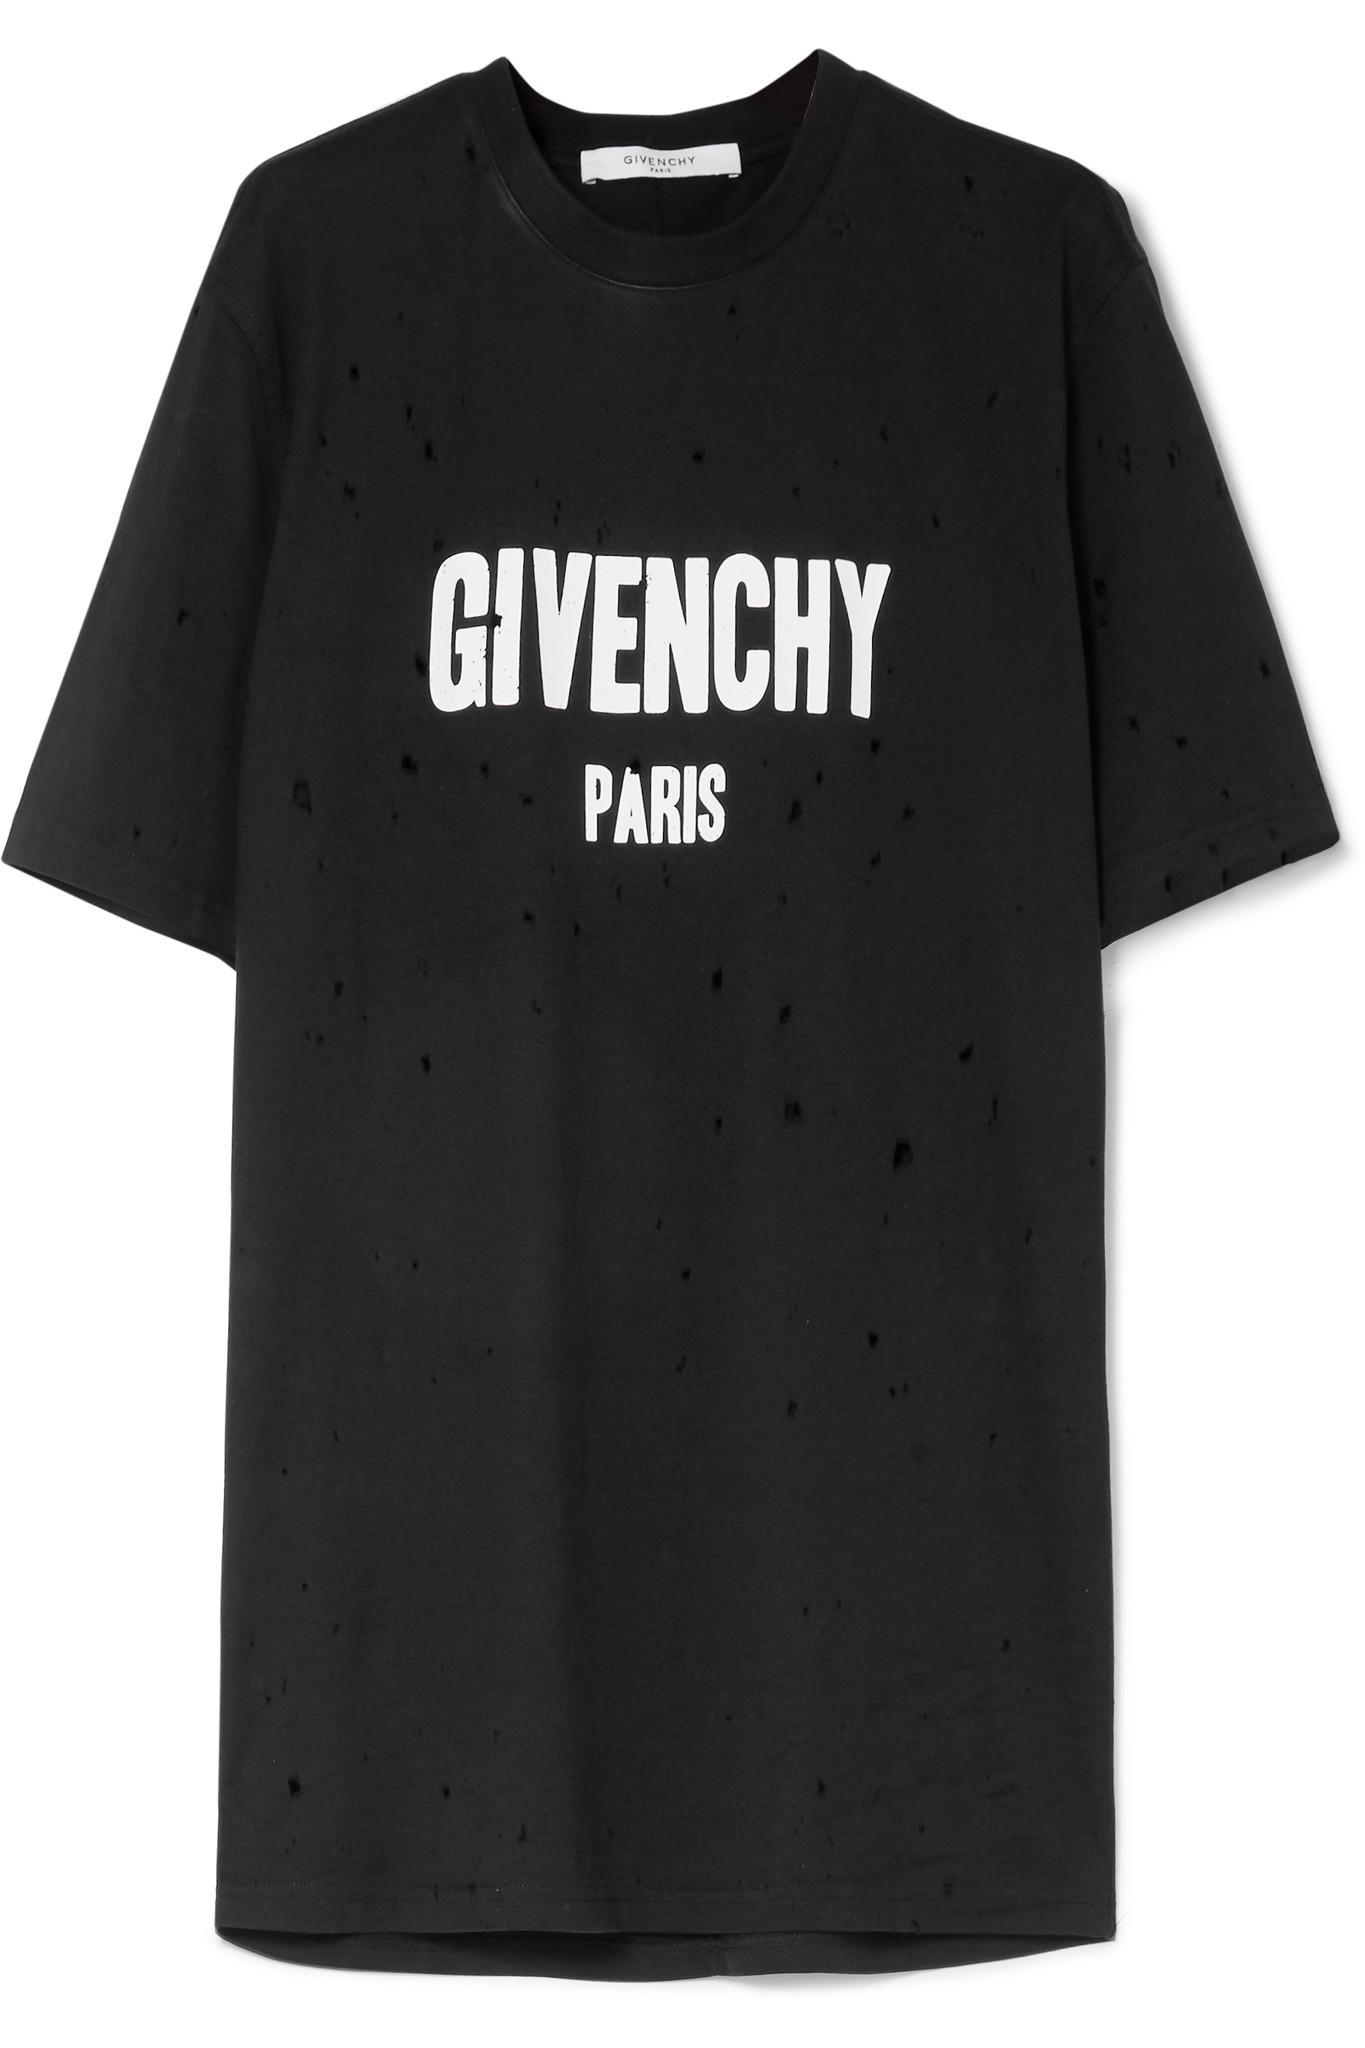 Lyst - Givenchy Oversized Distressed Printed Cotton-jersey T-shirt in Black